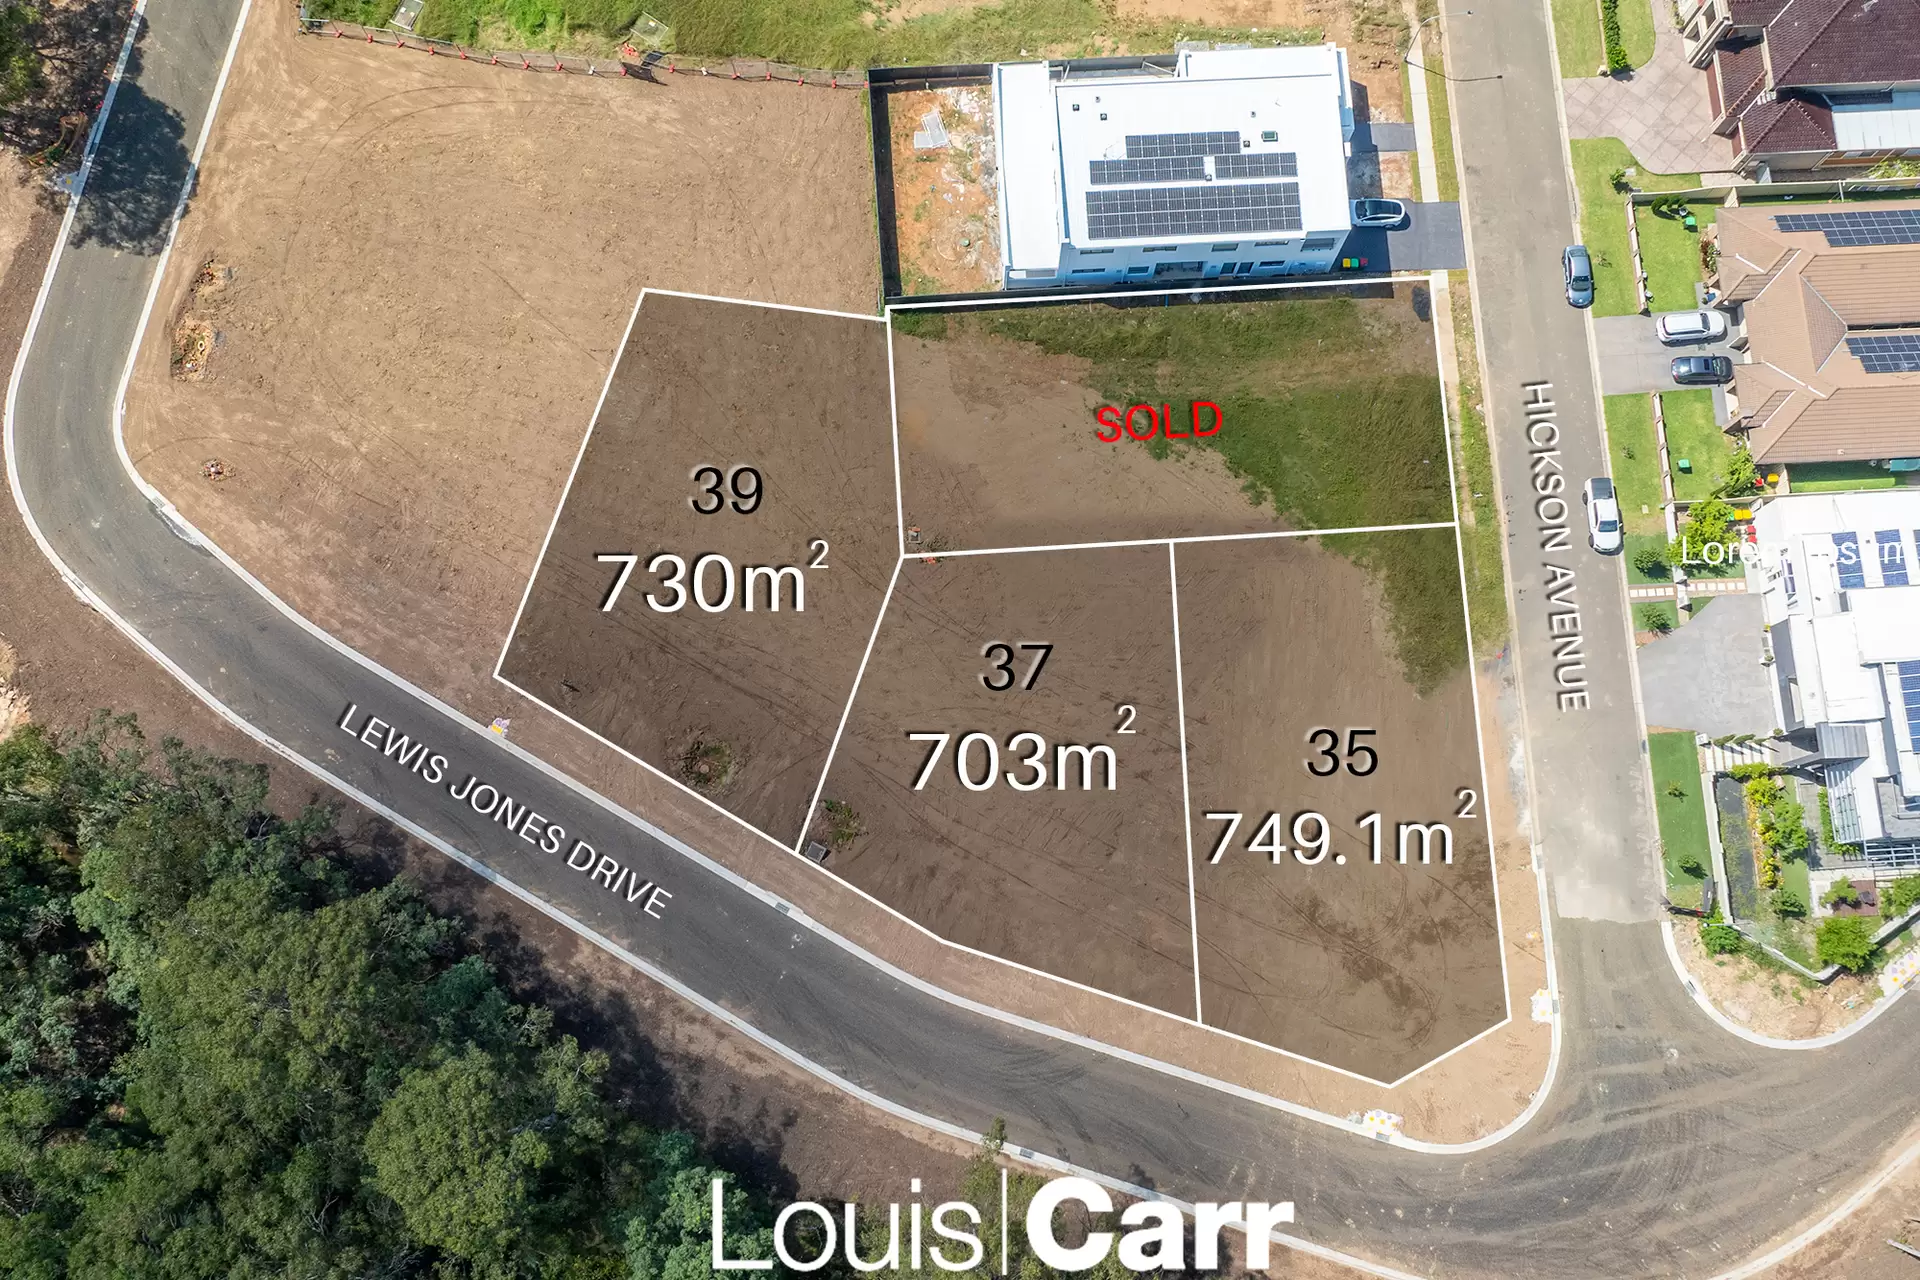 Lot 301-303,  Lewis Jones Drive, Kellyville For Sale by Louis Carr Real Estate - image 1